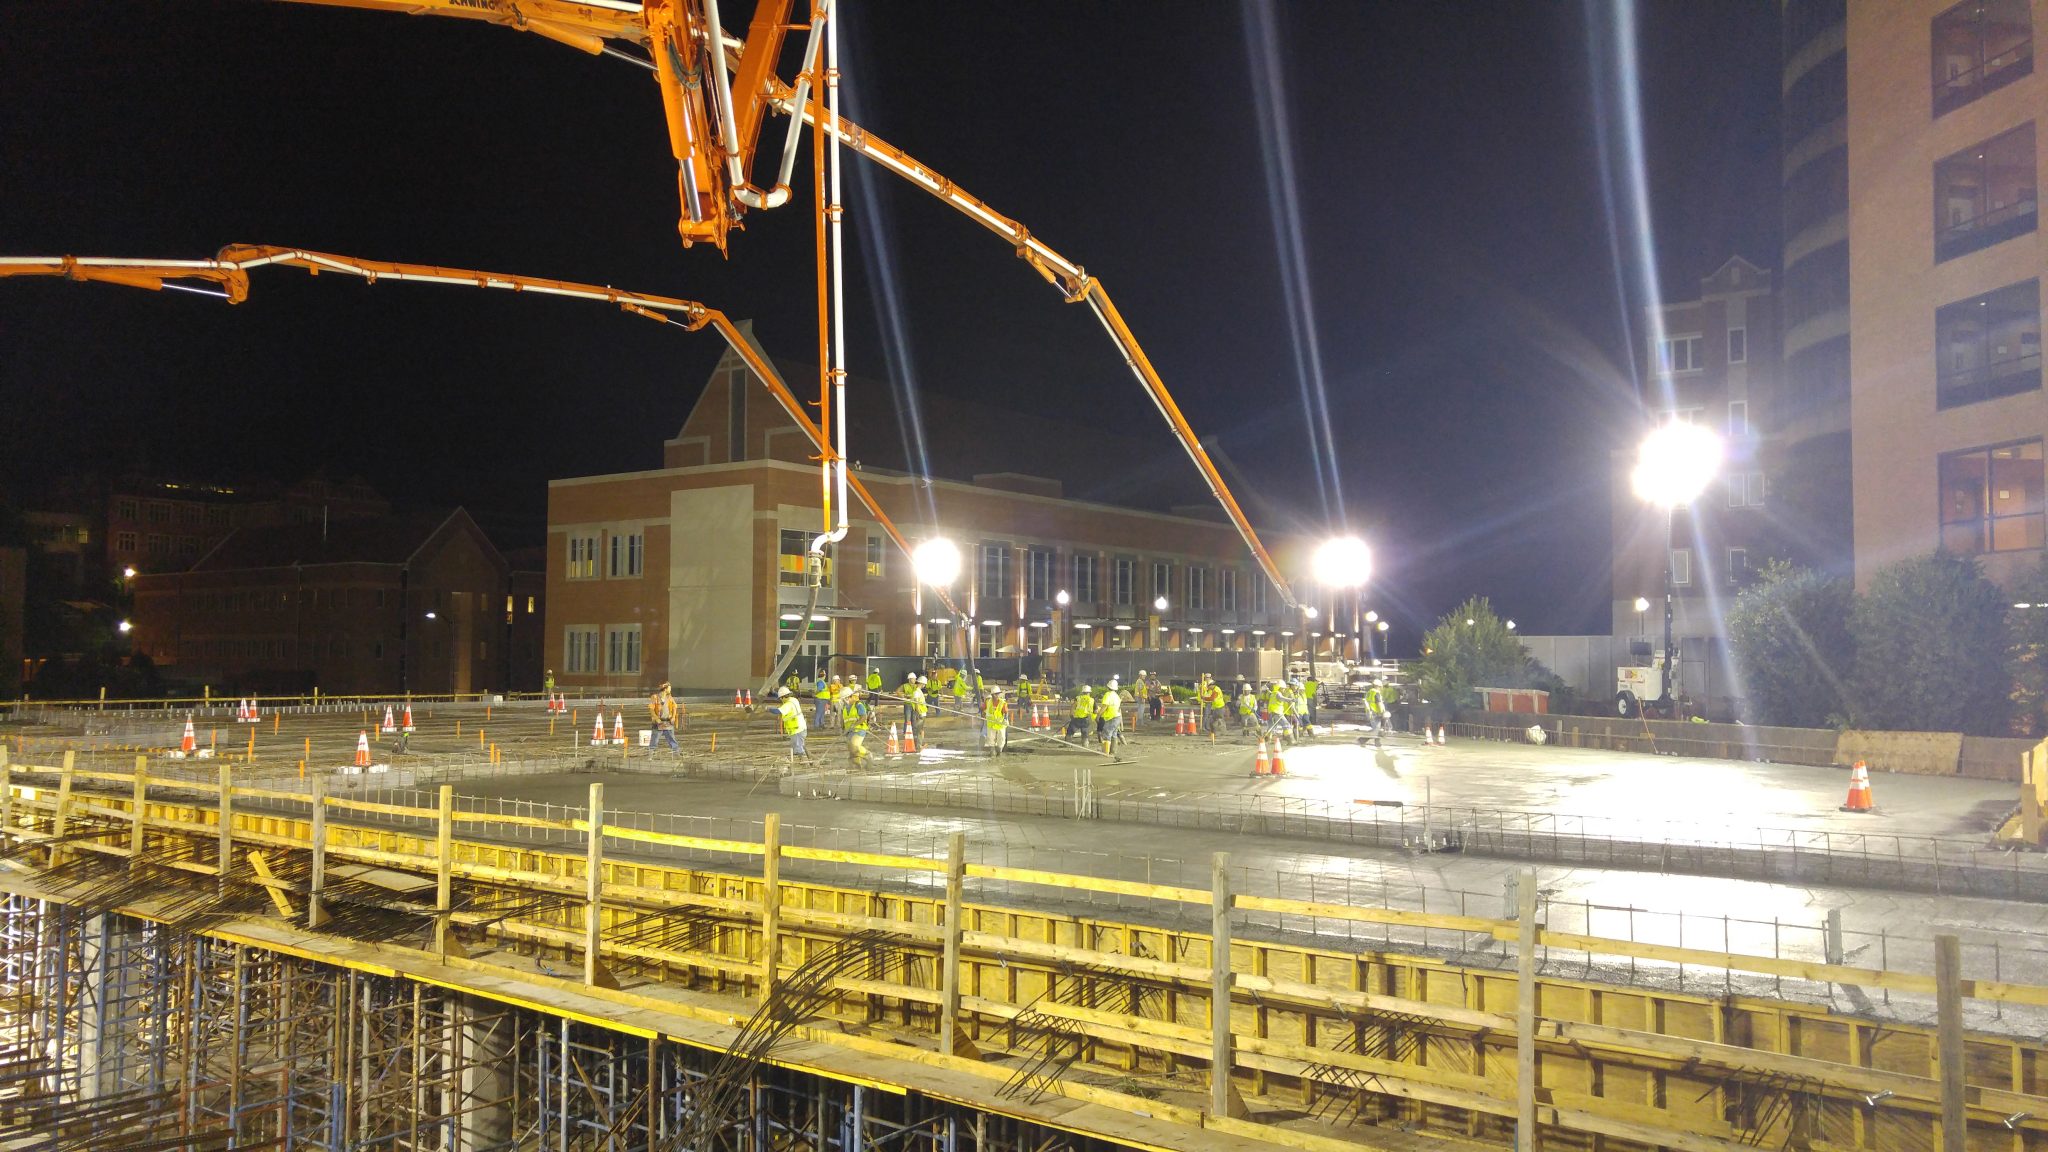 university of tennessee student center phase 2 project by glenn e. mitchell concrete contractors